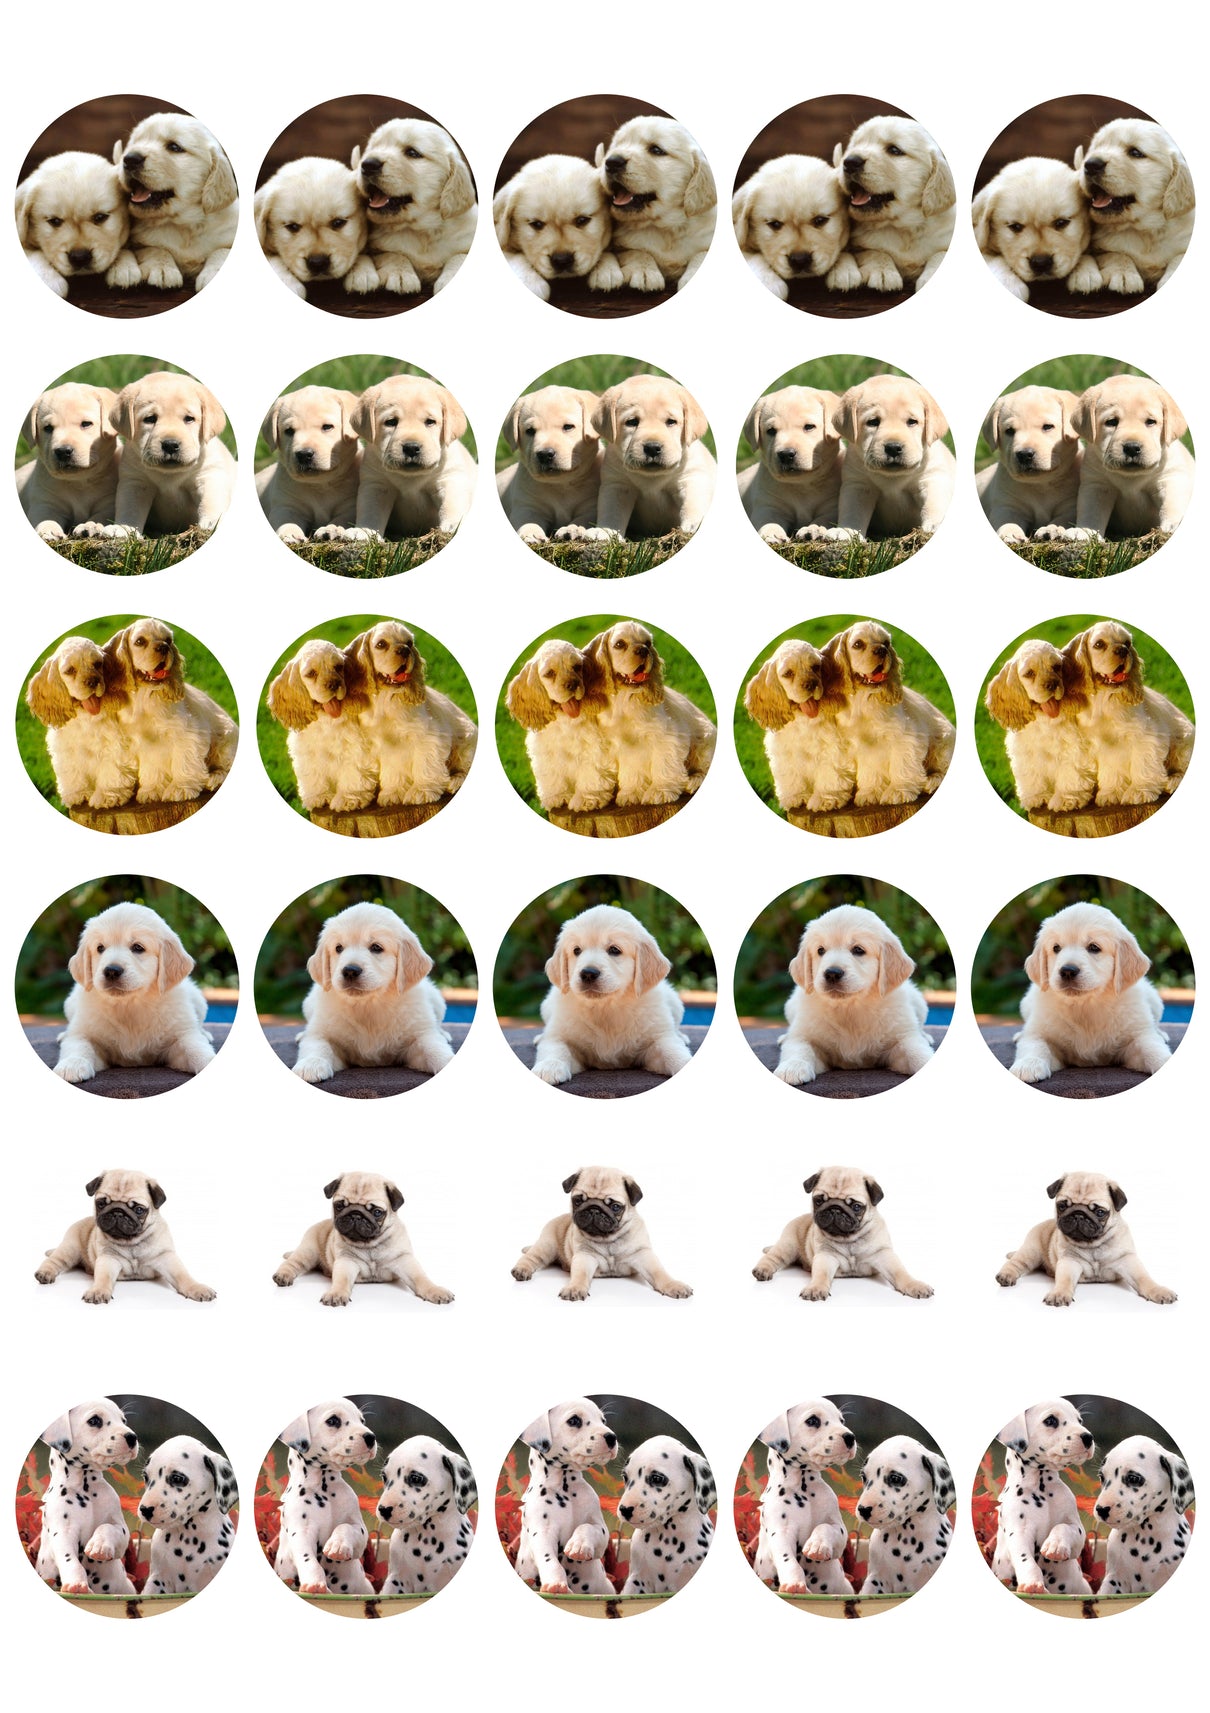 Puppies Pugs Dalmatians Dog Breeds Edible Cupcake Topper Images ABPID03938